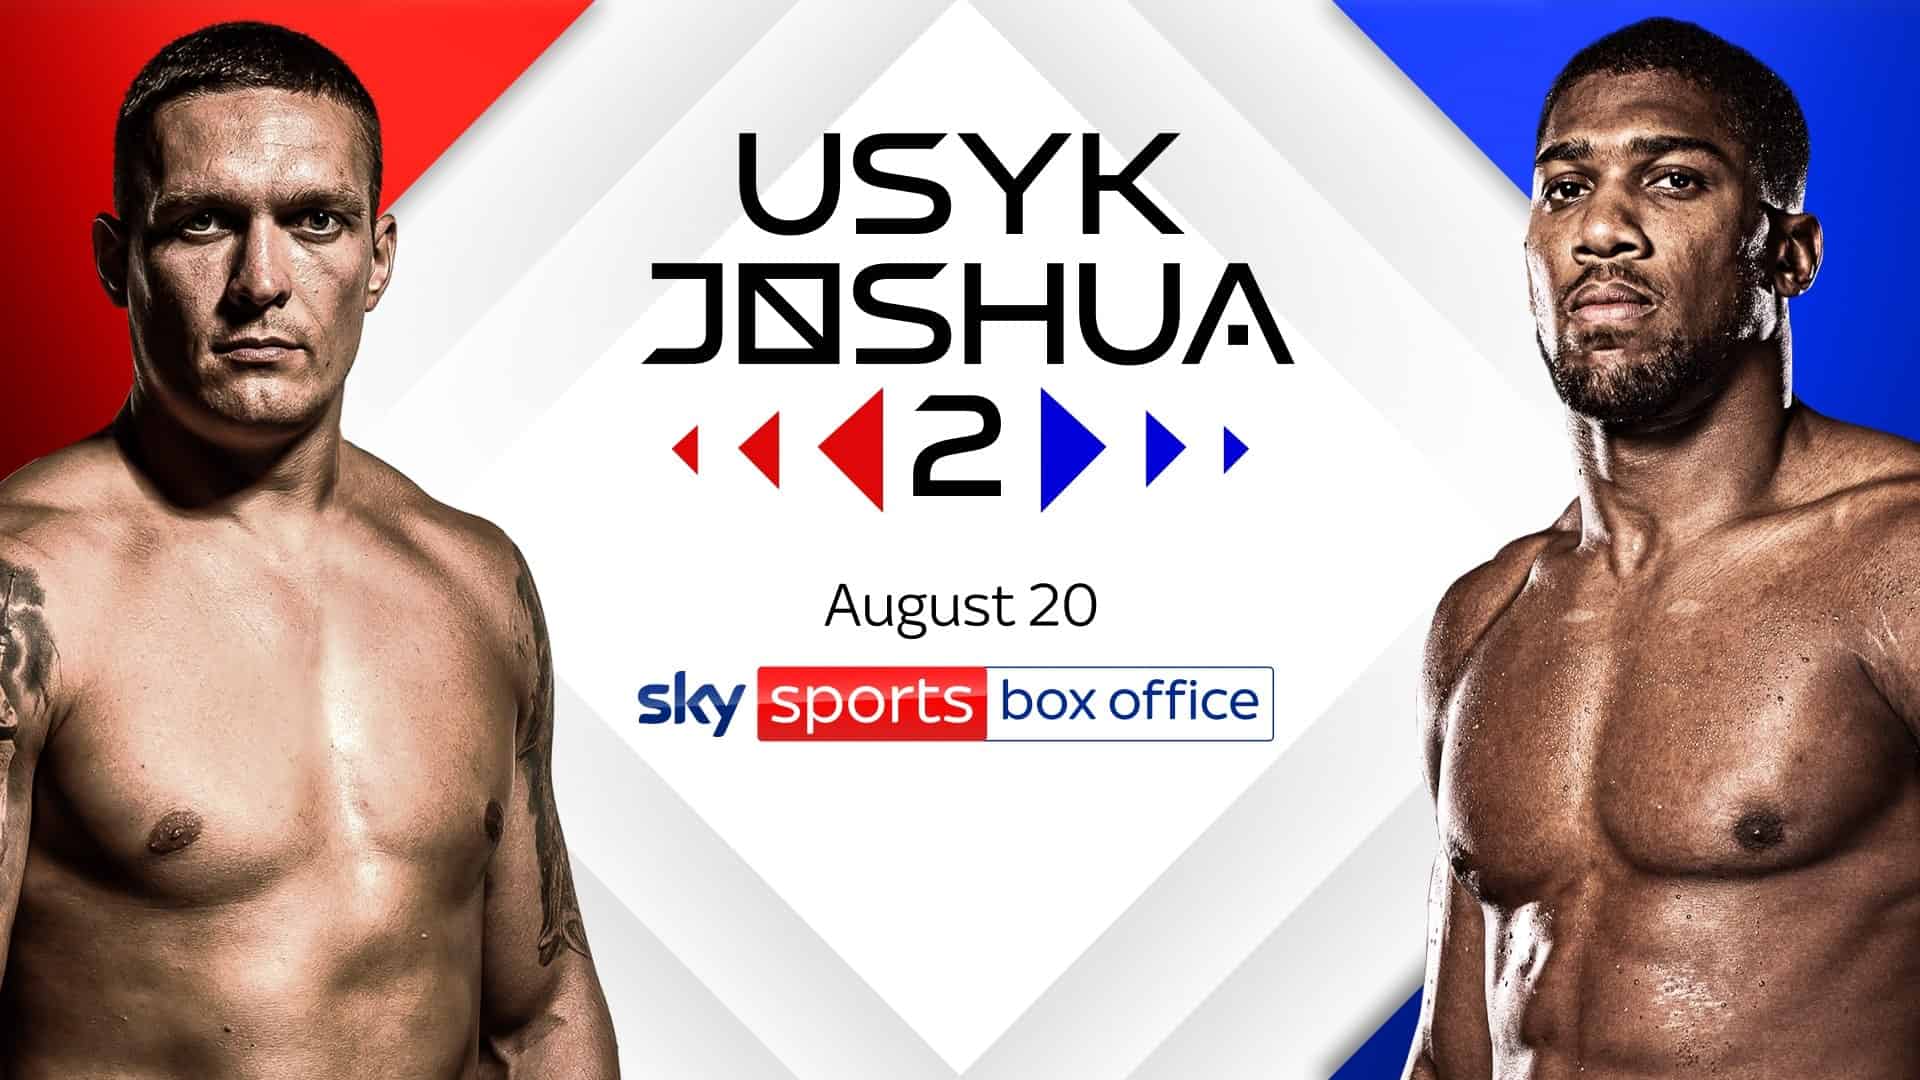 Usyk vs Joshua 2 PPV price rise rivals USA as pattern emerges